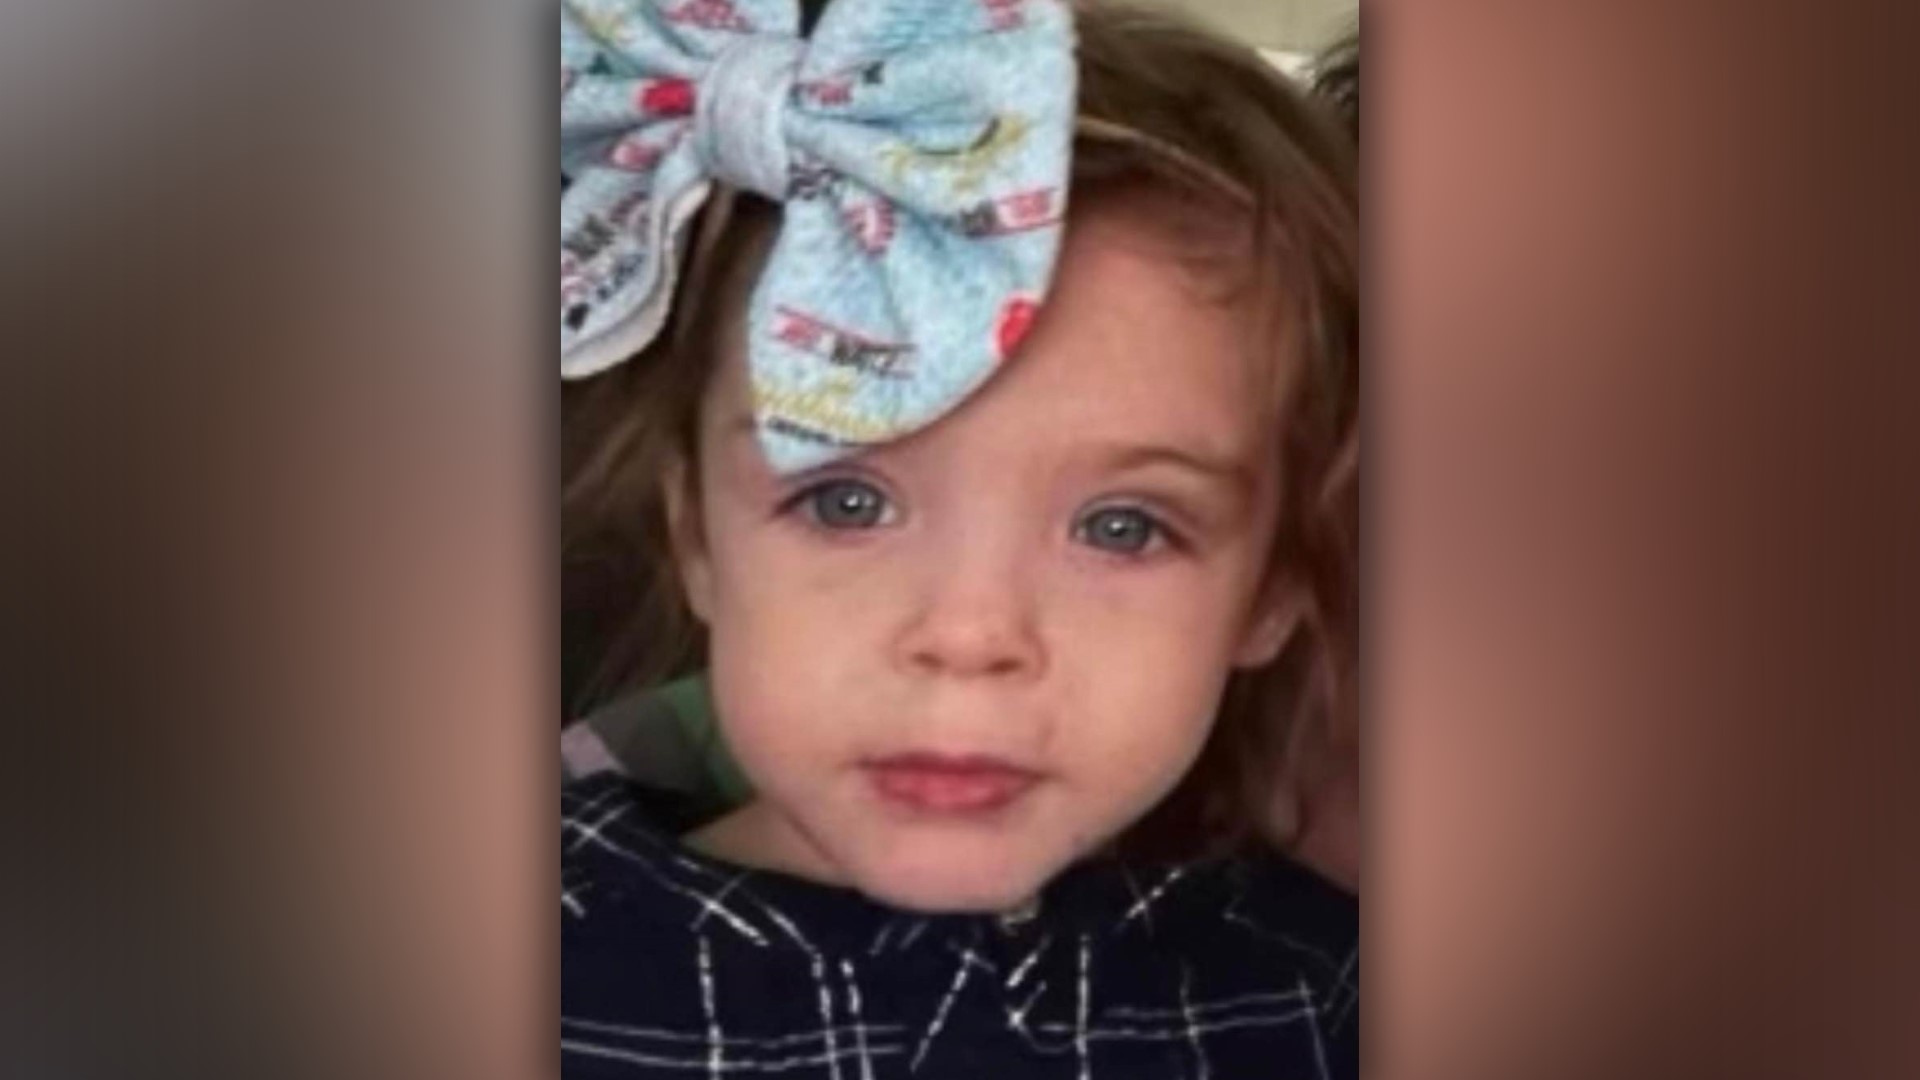 A missing four-year-old Oklahoma girl was beaten to death Christmas night by her caregiver, then buried, according to court documents released on Tuesday.